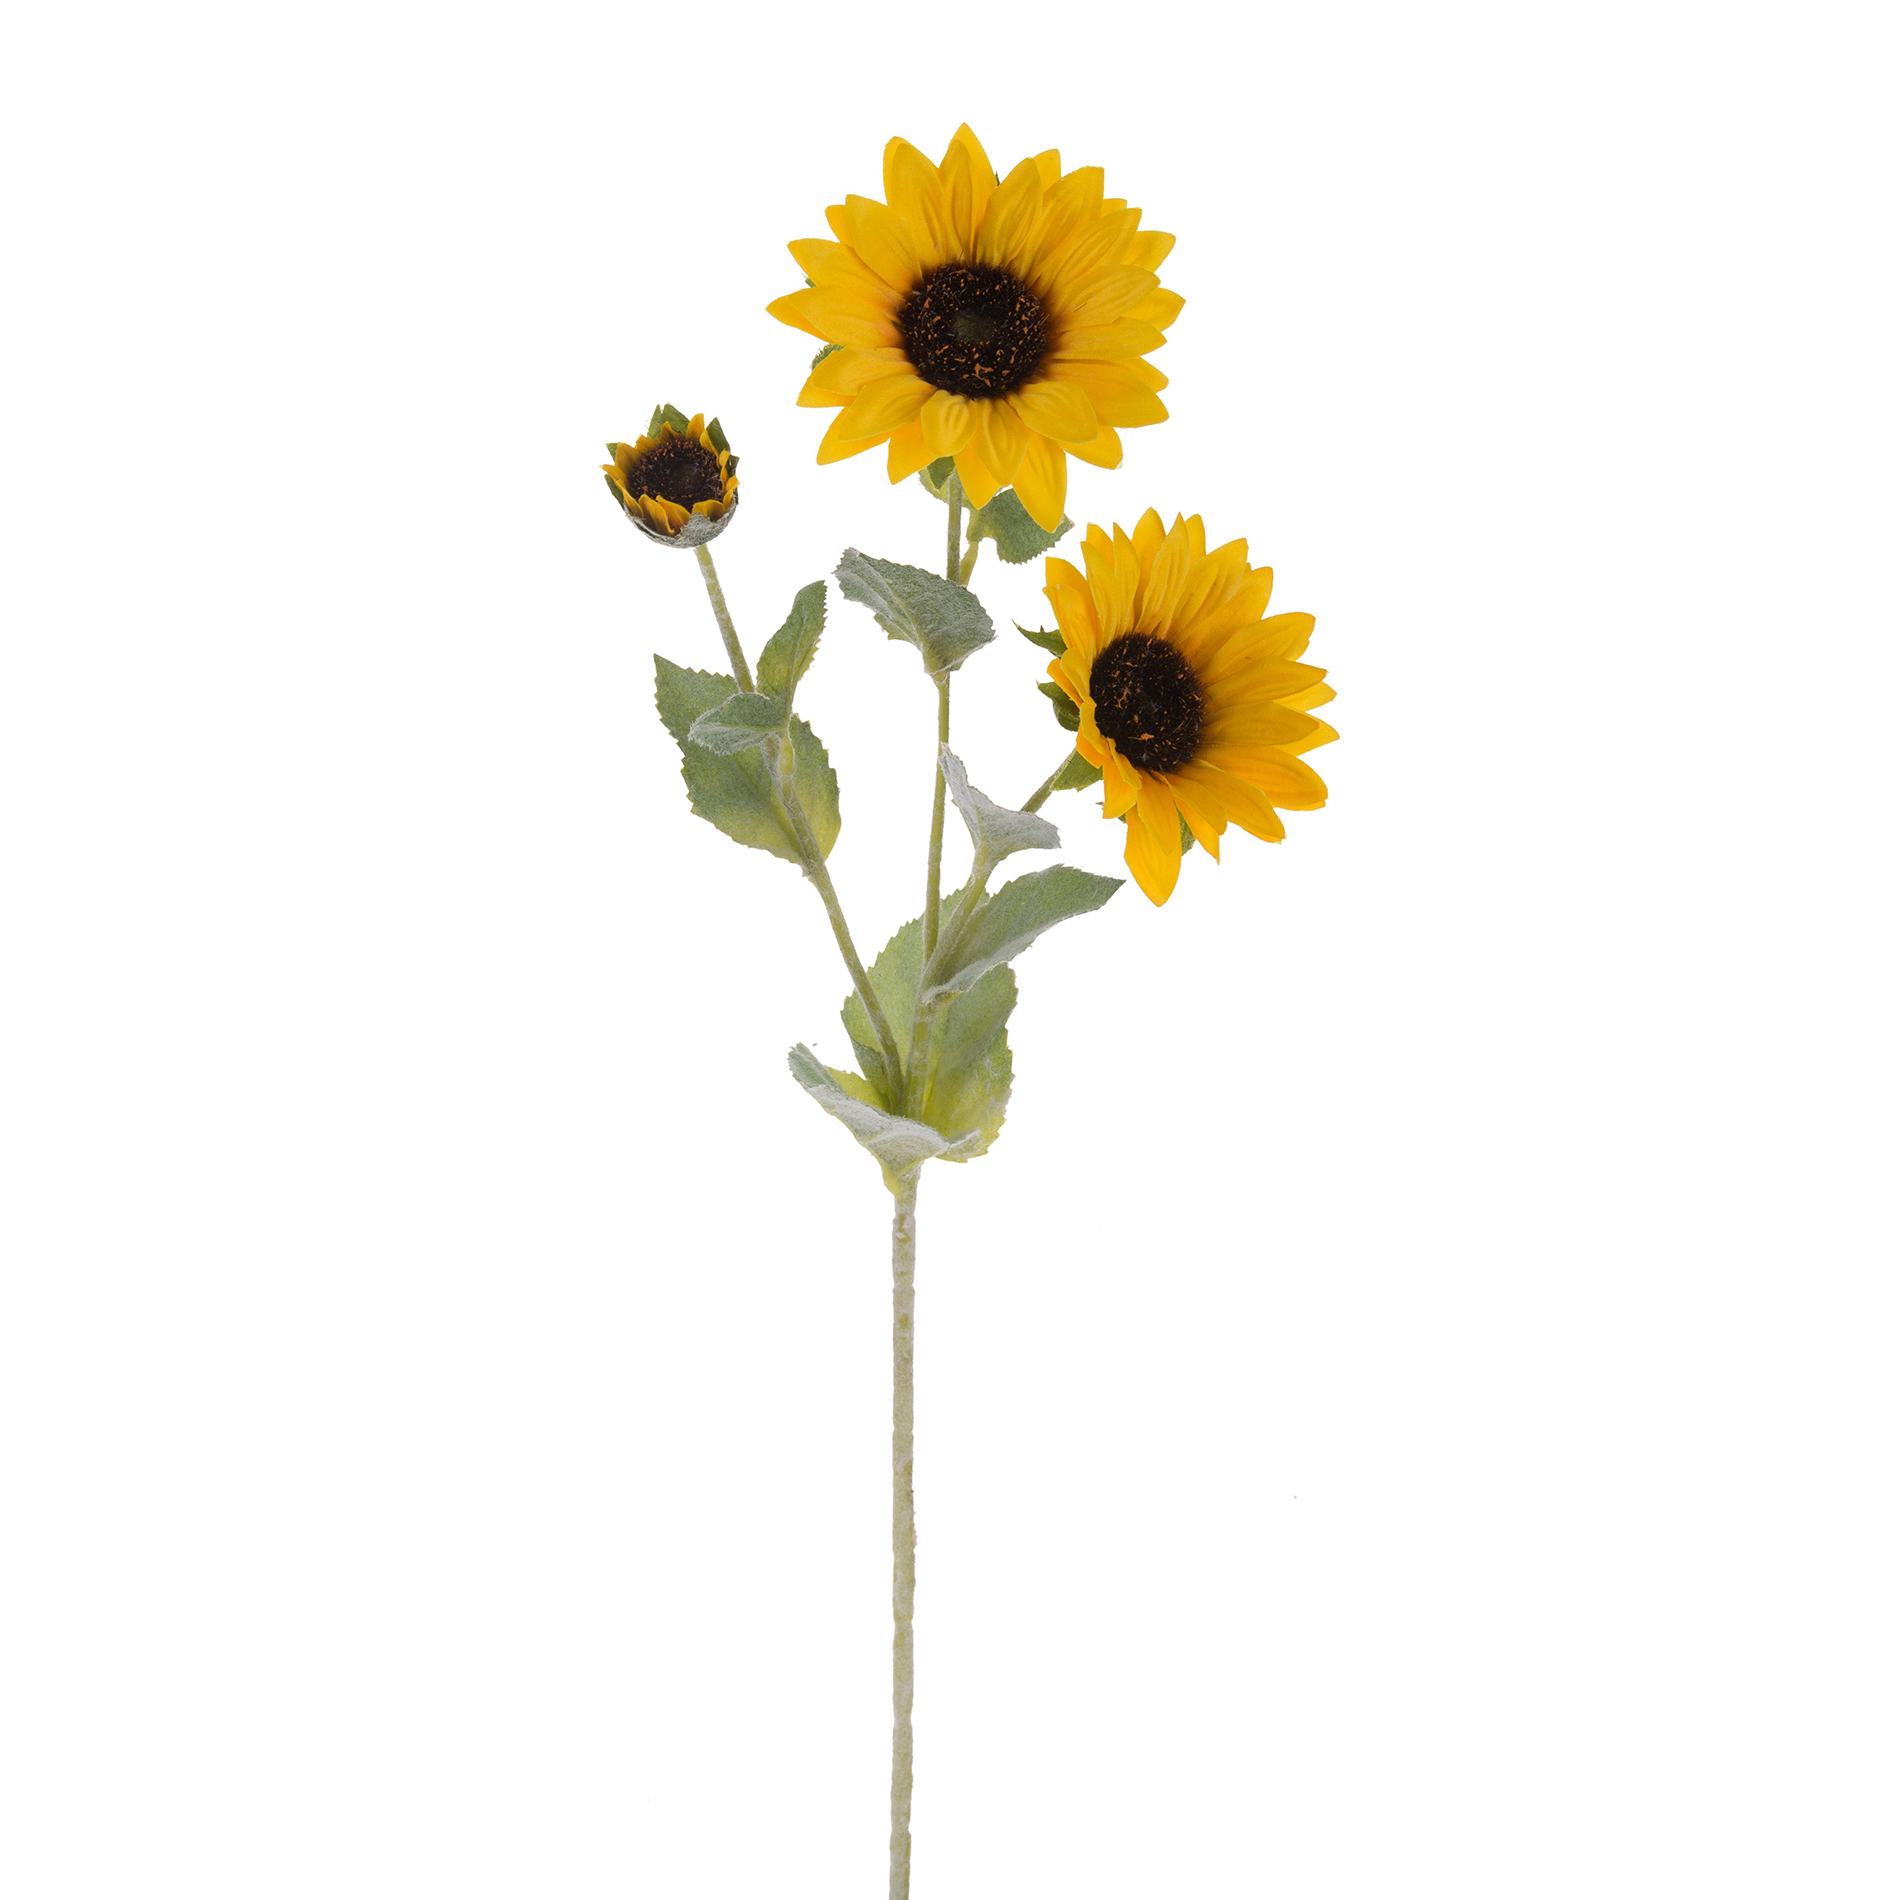 CHRISTMAS ITEMS,DRIED FLOWERS AND STEM ITEMS FOR CHRISTMAS,GIRASOLE X 3 63,5 CM